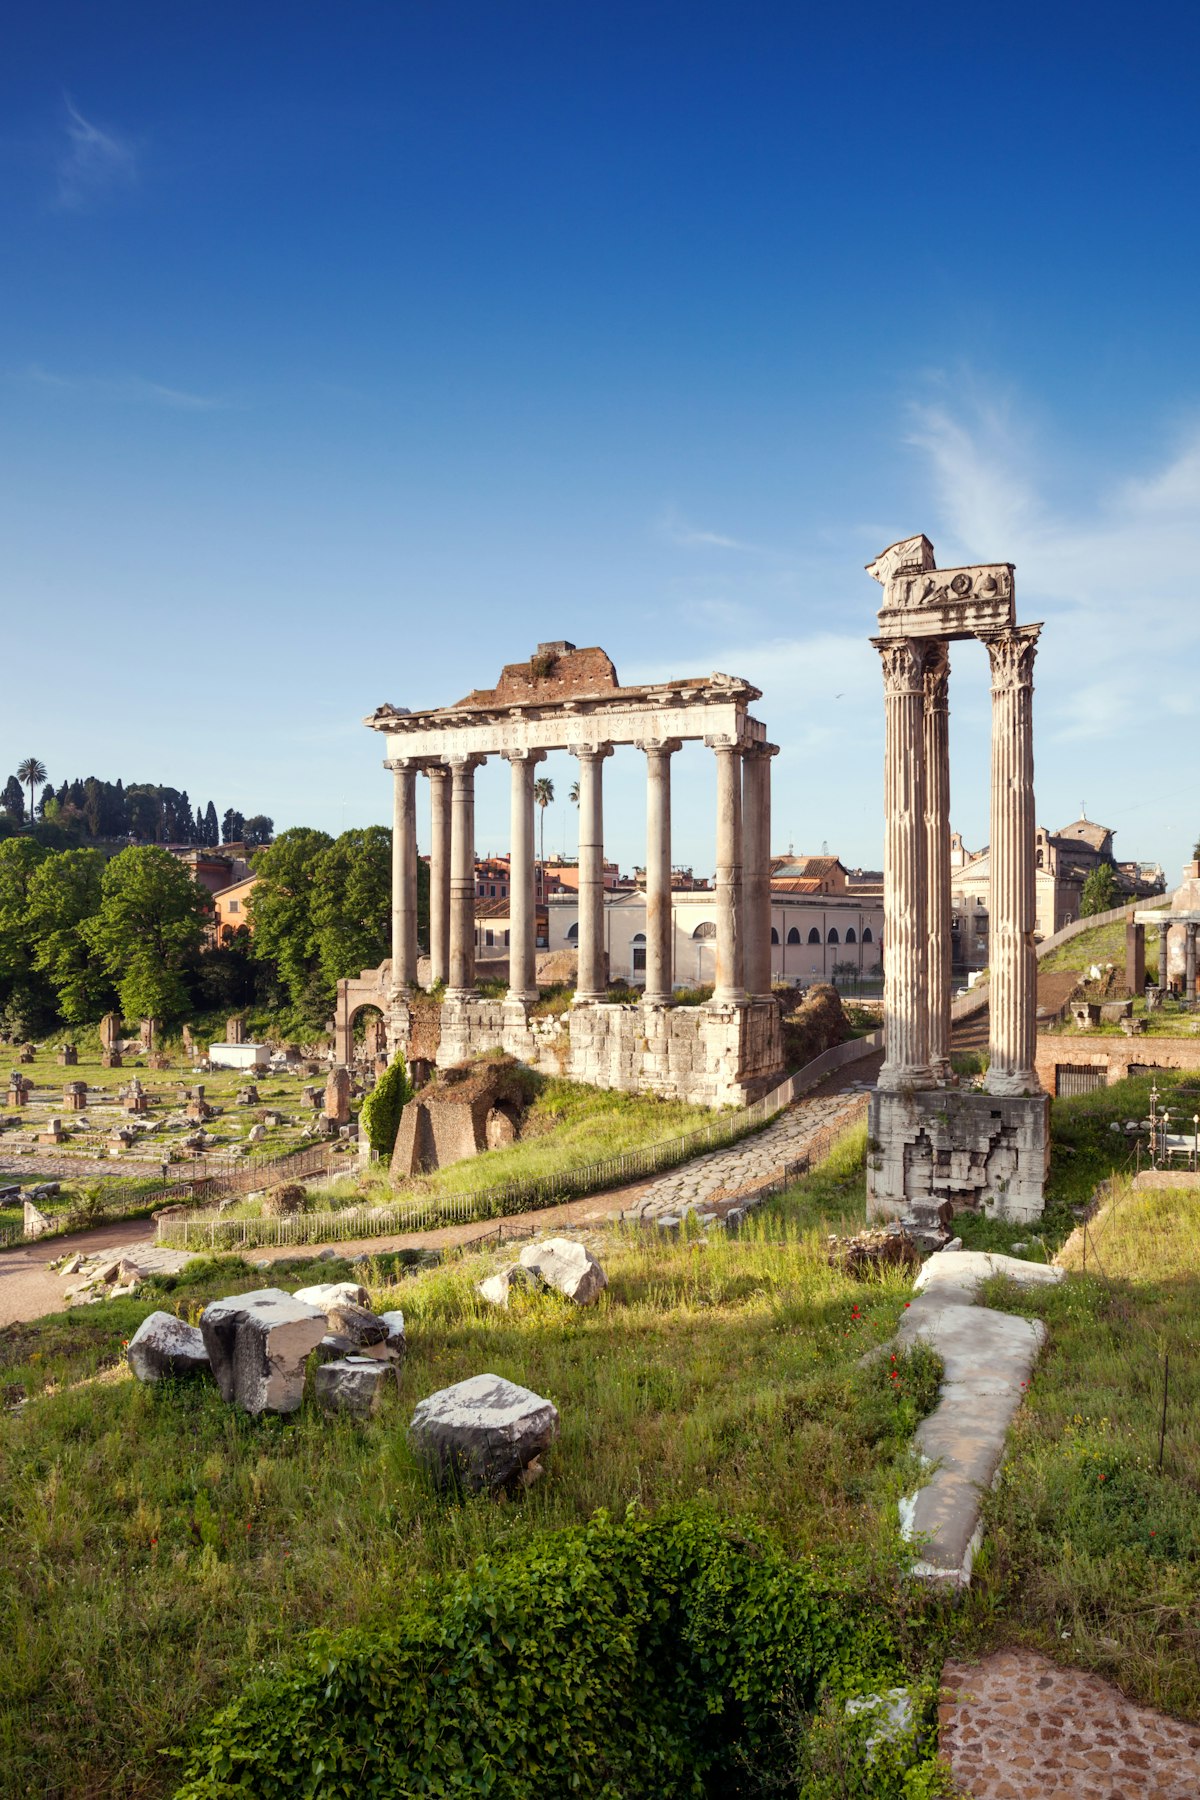 568886113
2015; Ancient History; Ancient Rome; Archaeology; Architecture; Capital Cities; City; Copy Space; Day; High Angle View; International Landmark; Italian Culture; Italy; Lazio; Majestic; No People; Old Ruin; Outdoors; Photography; Roman; Roman Forum; Rome; Rome - Italy; Scenics - Nature; Temple - Building; Temple Of Saturn; The Past; Tourism; Travel Destinations; Vertical;
The temple of Saturn in the Roman Forum, Rome, Lazio.